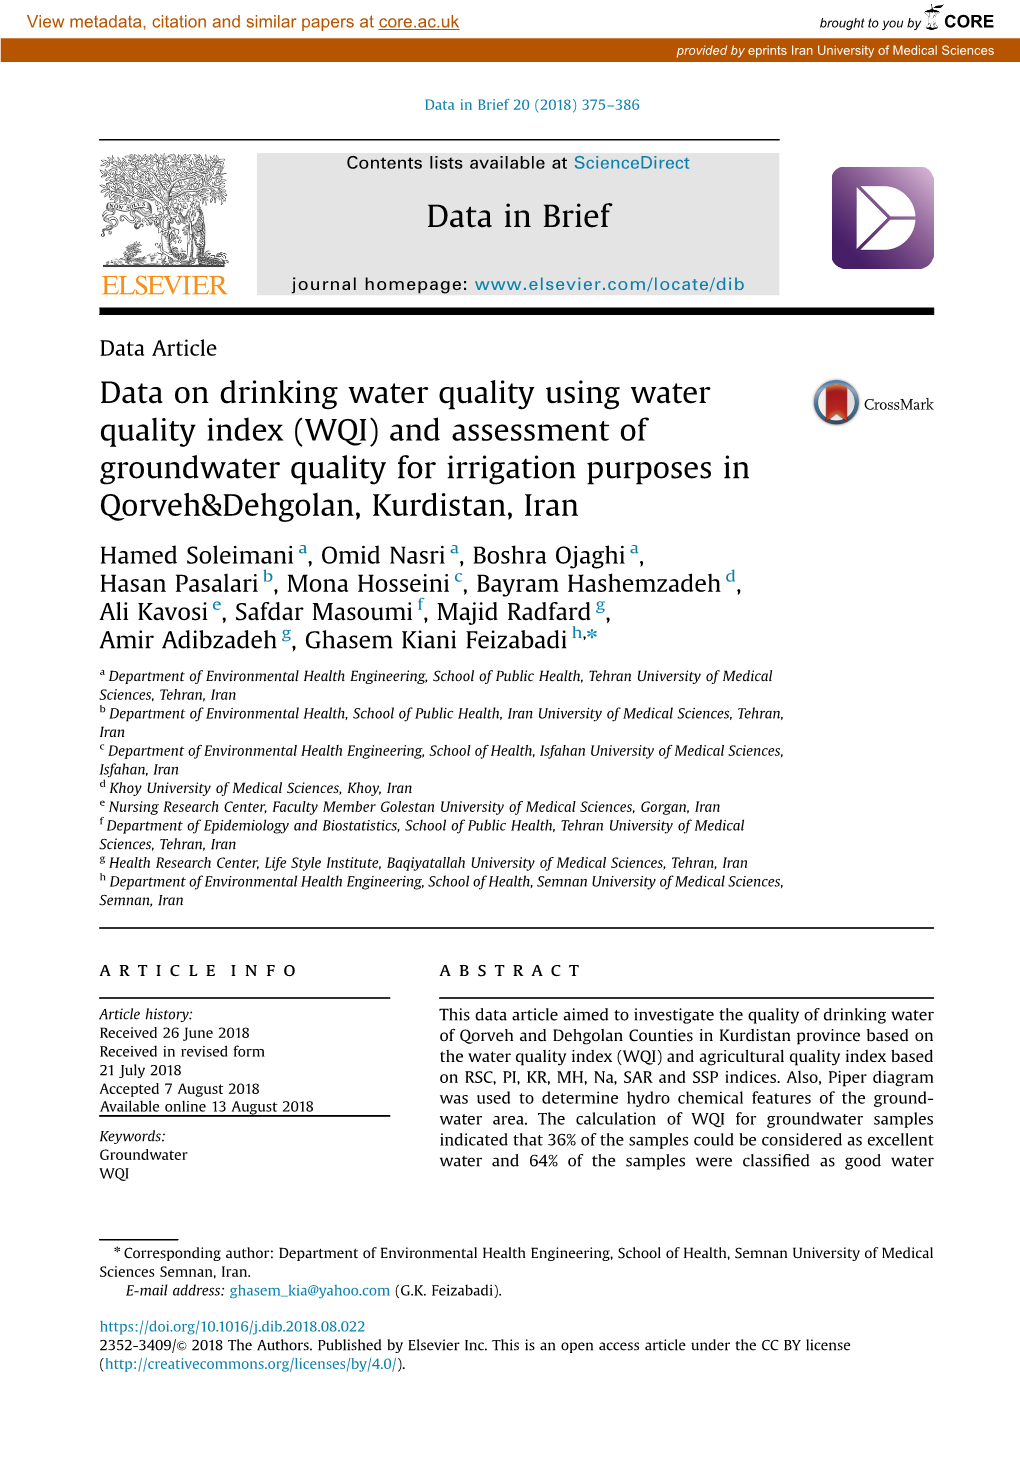 WQI) and Assessment of Groundwater Quality for Irrigation Purposes in Qorveh&Dehgolan, Kurdistan, Iran